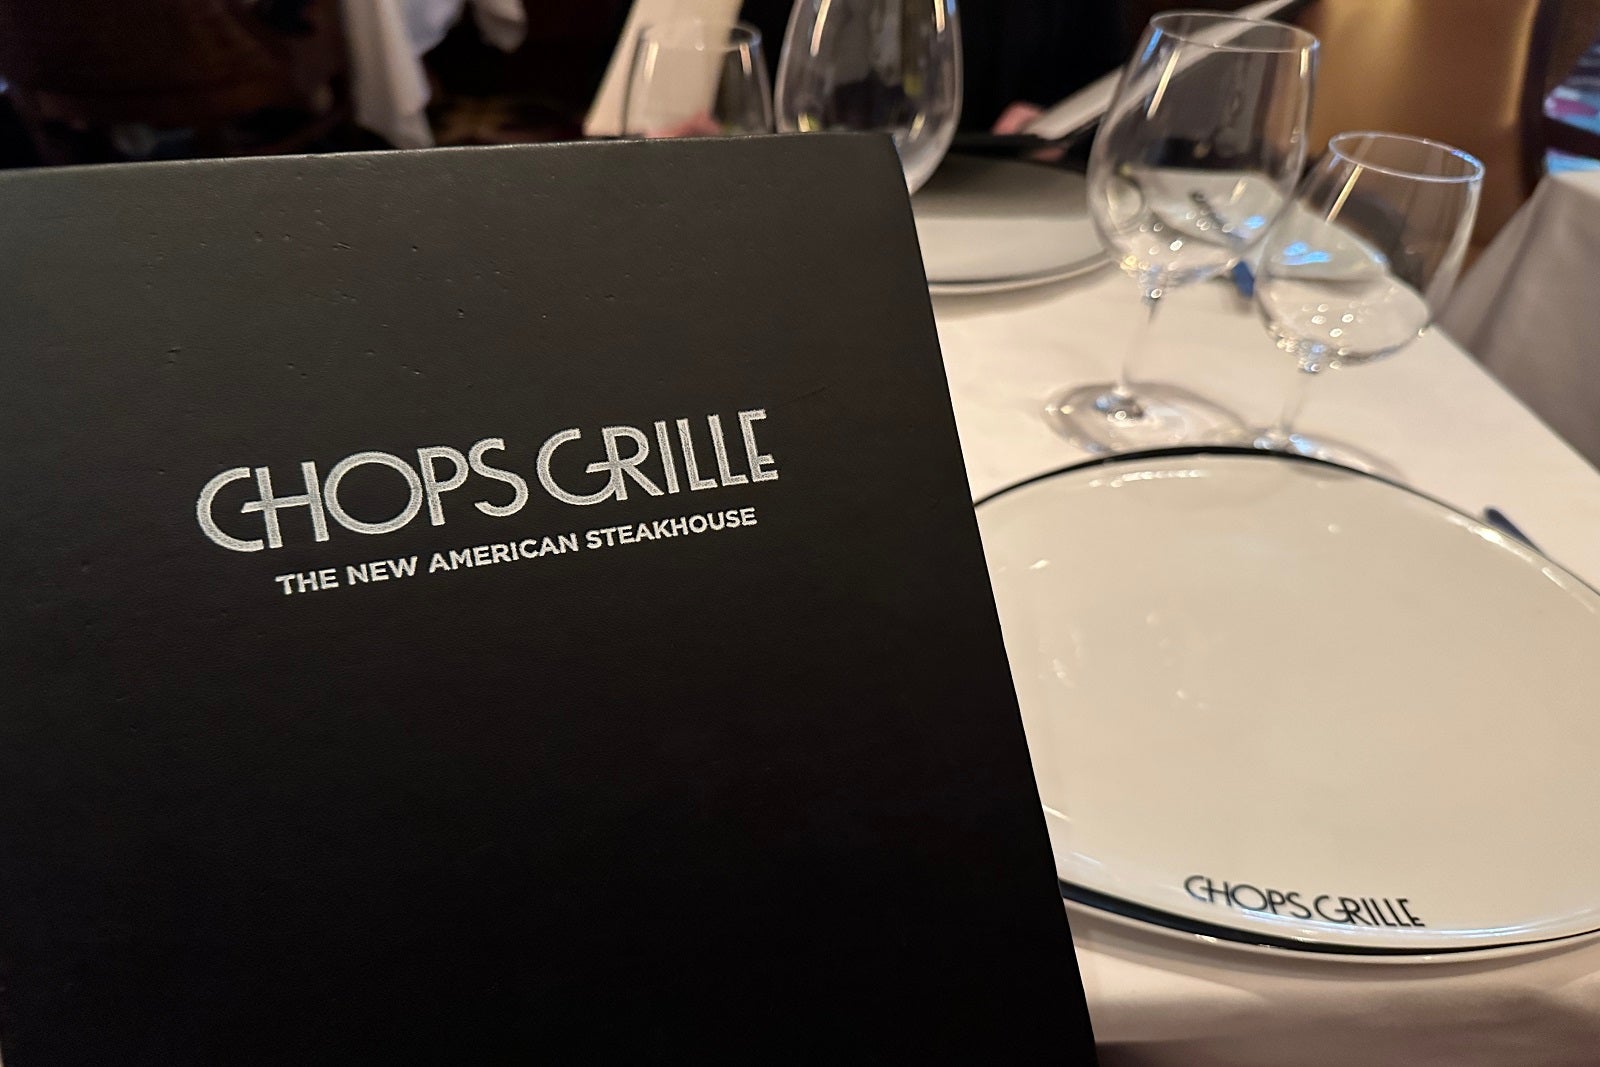 You are currently viewing Chops Grille: Royal Caribbean steakhouse cruise guide (with menu)